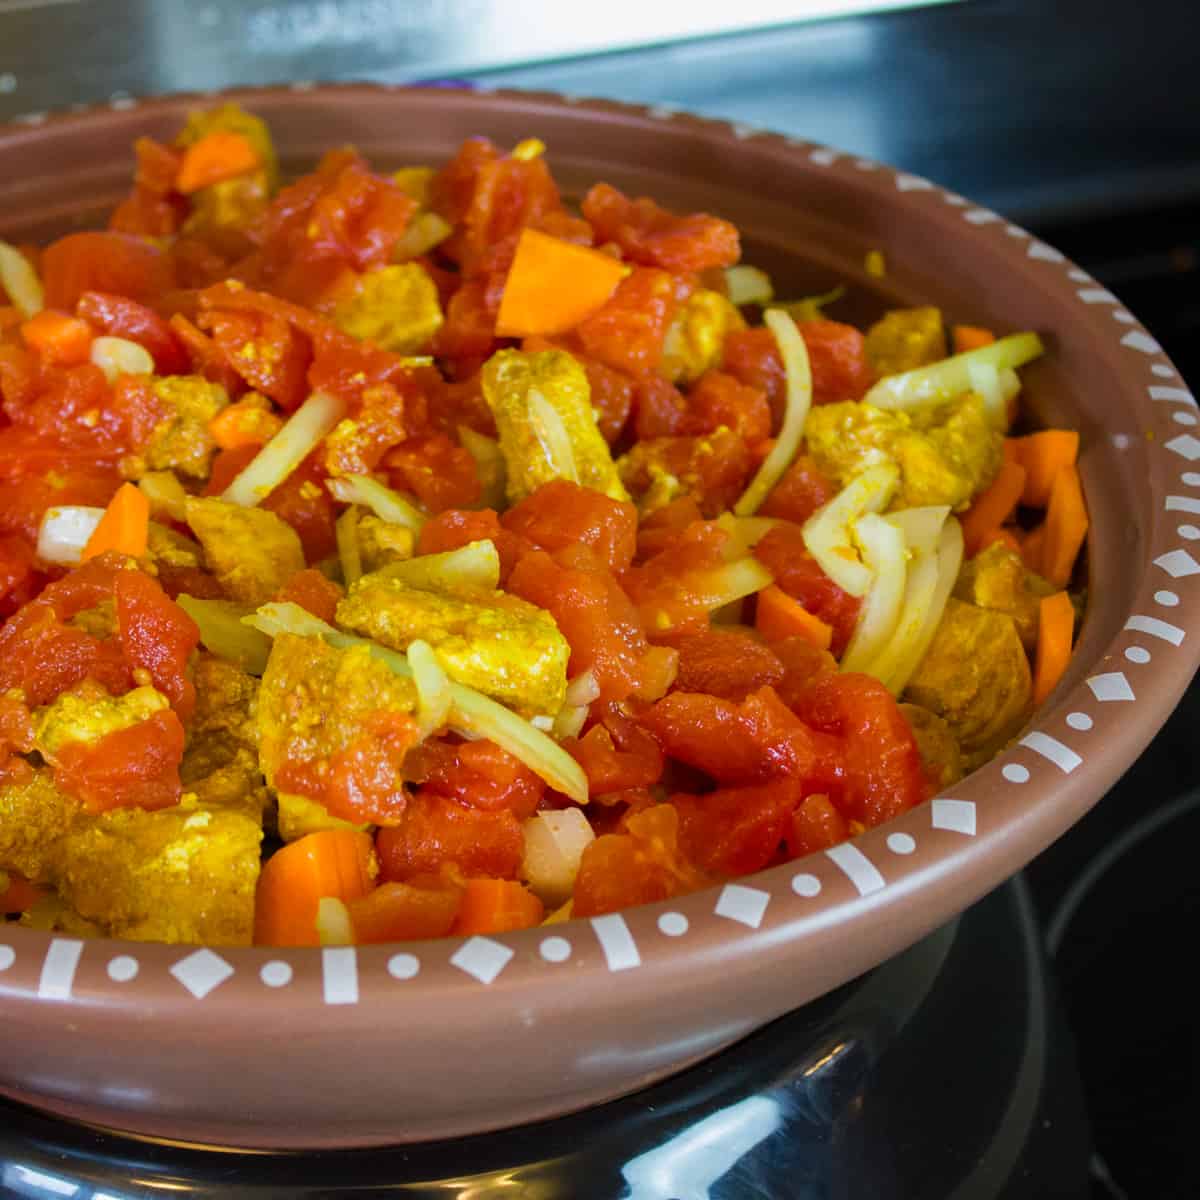 Skillet filled with cubed chicken, onion, carrots and tomatoes.